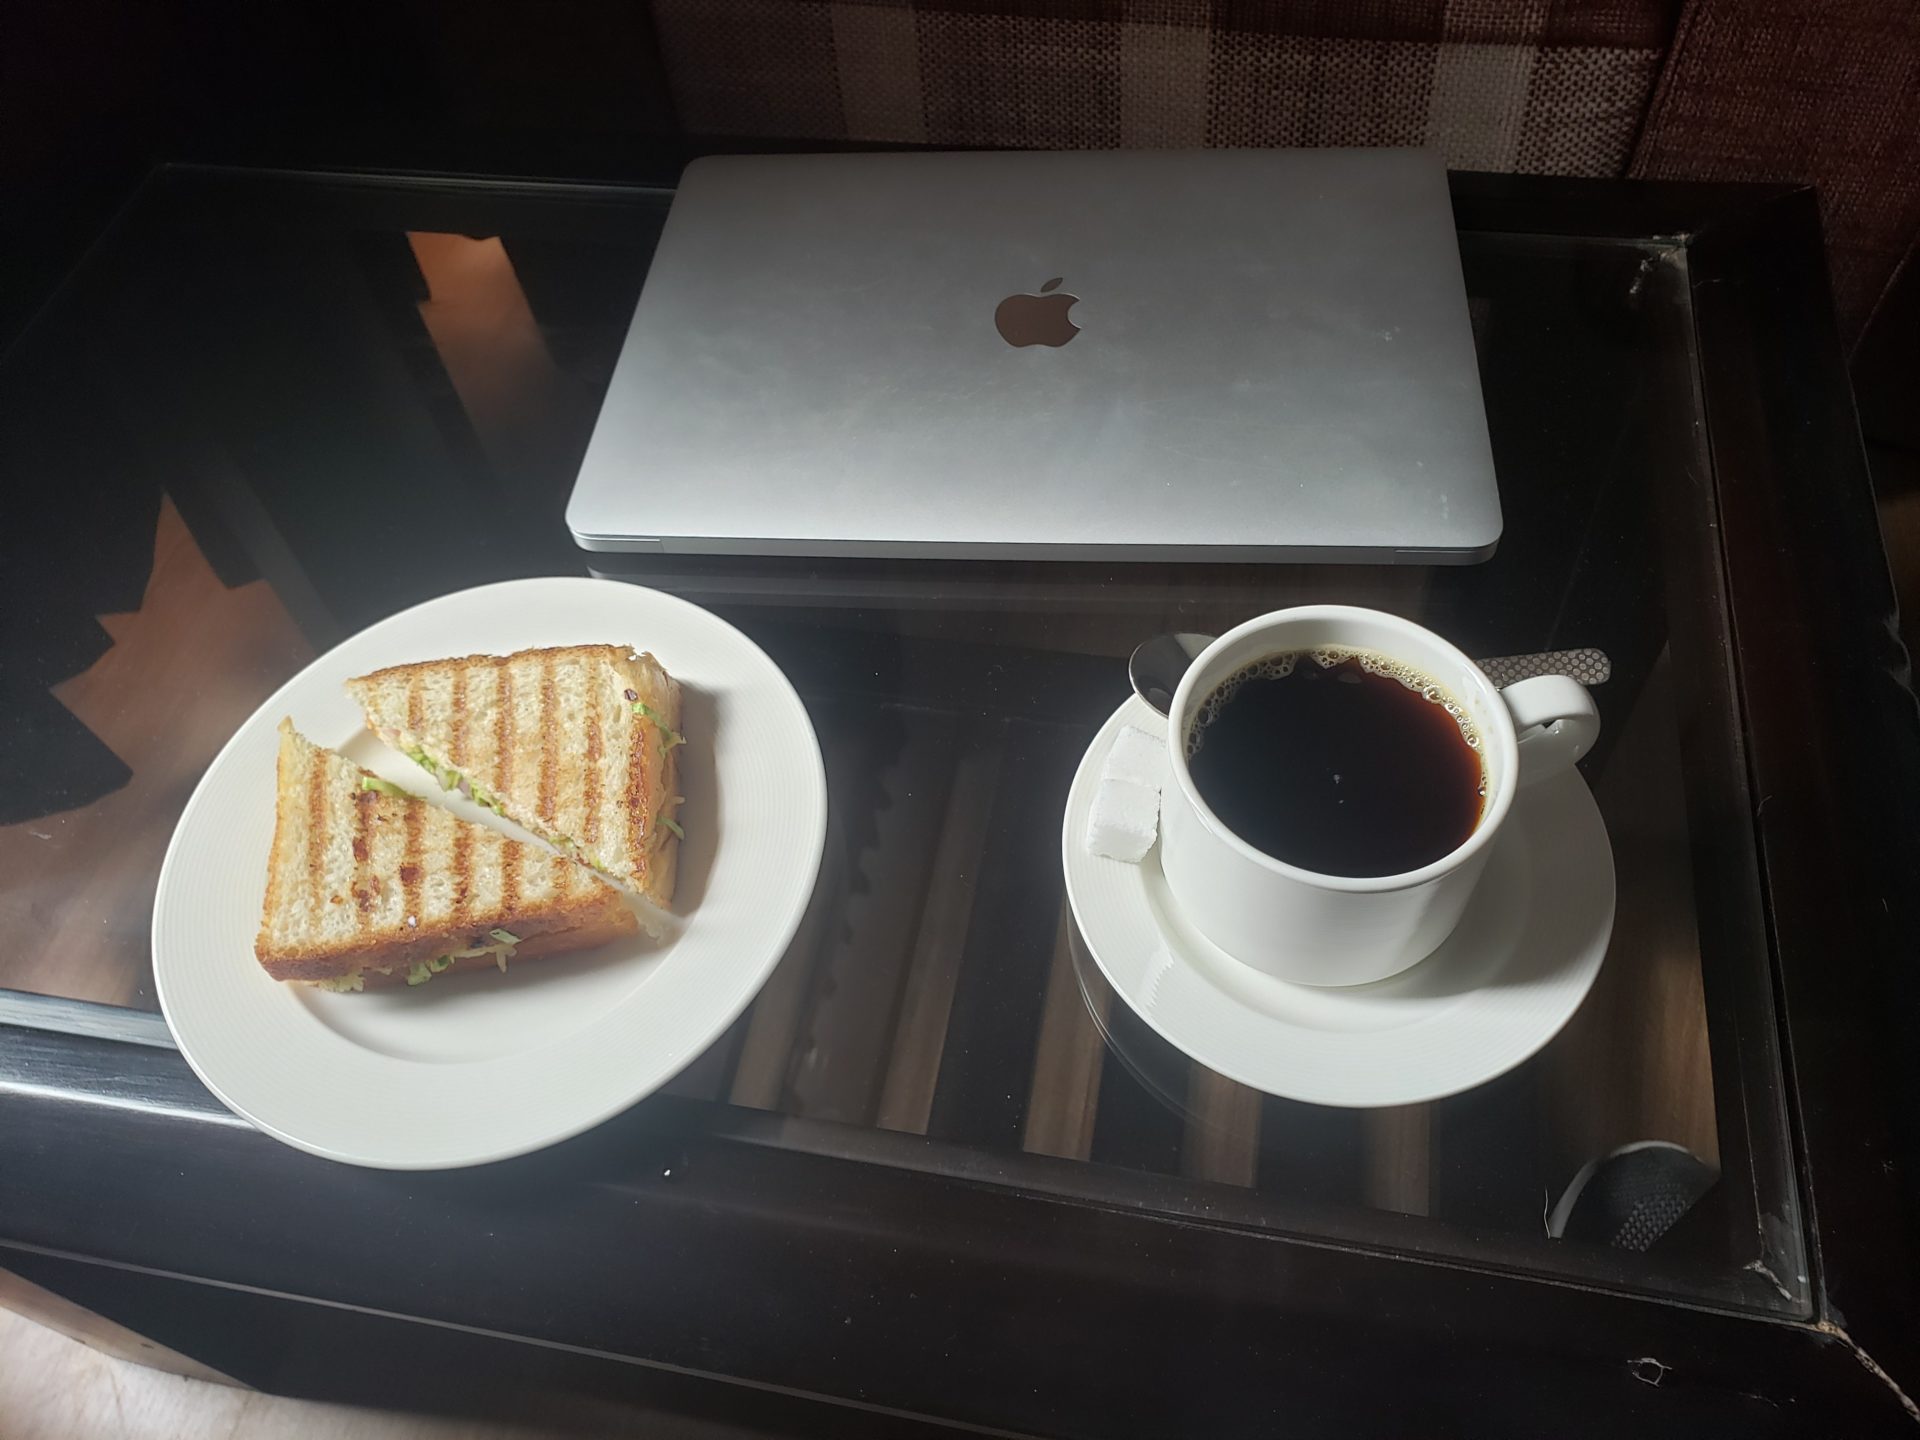 a plate of sandwich and a cup of coffee on a glass table